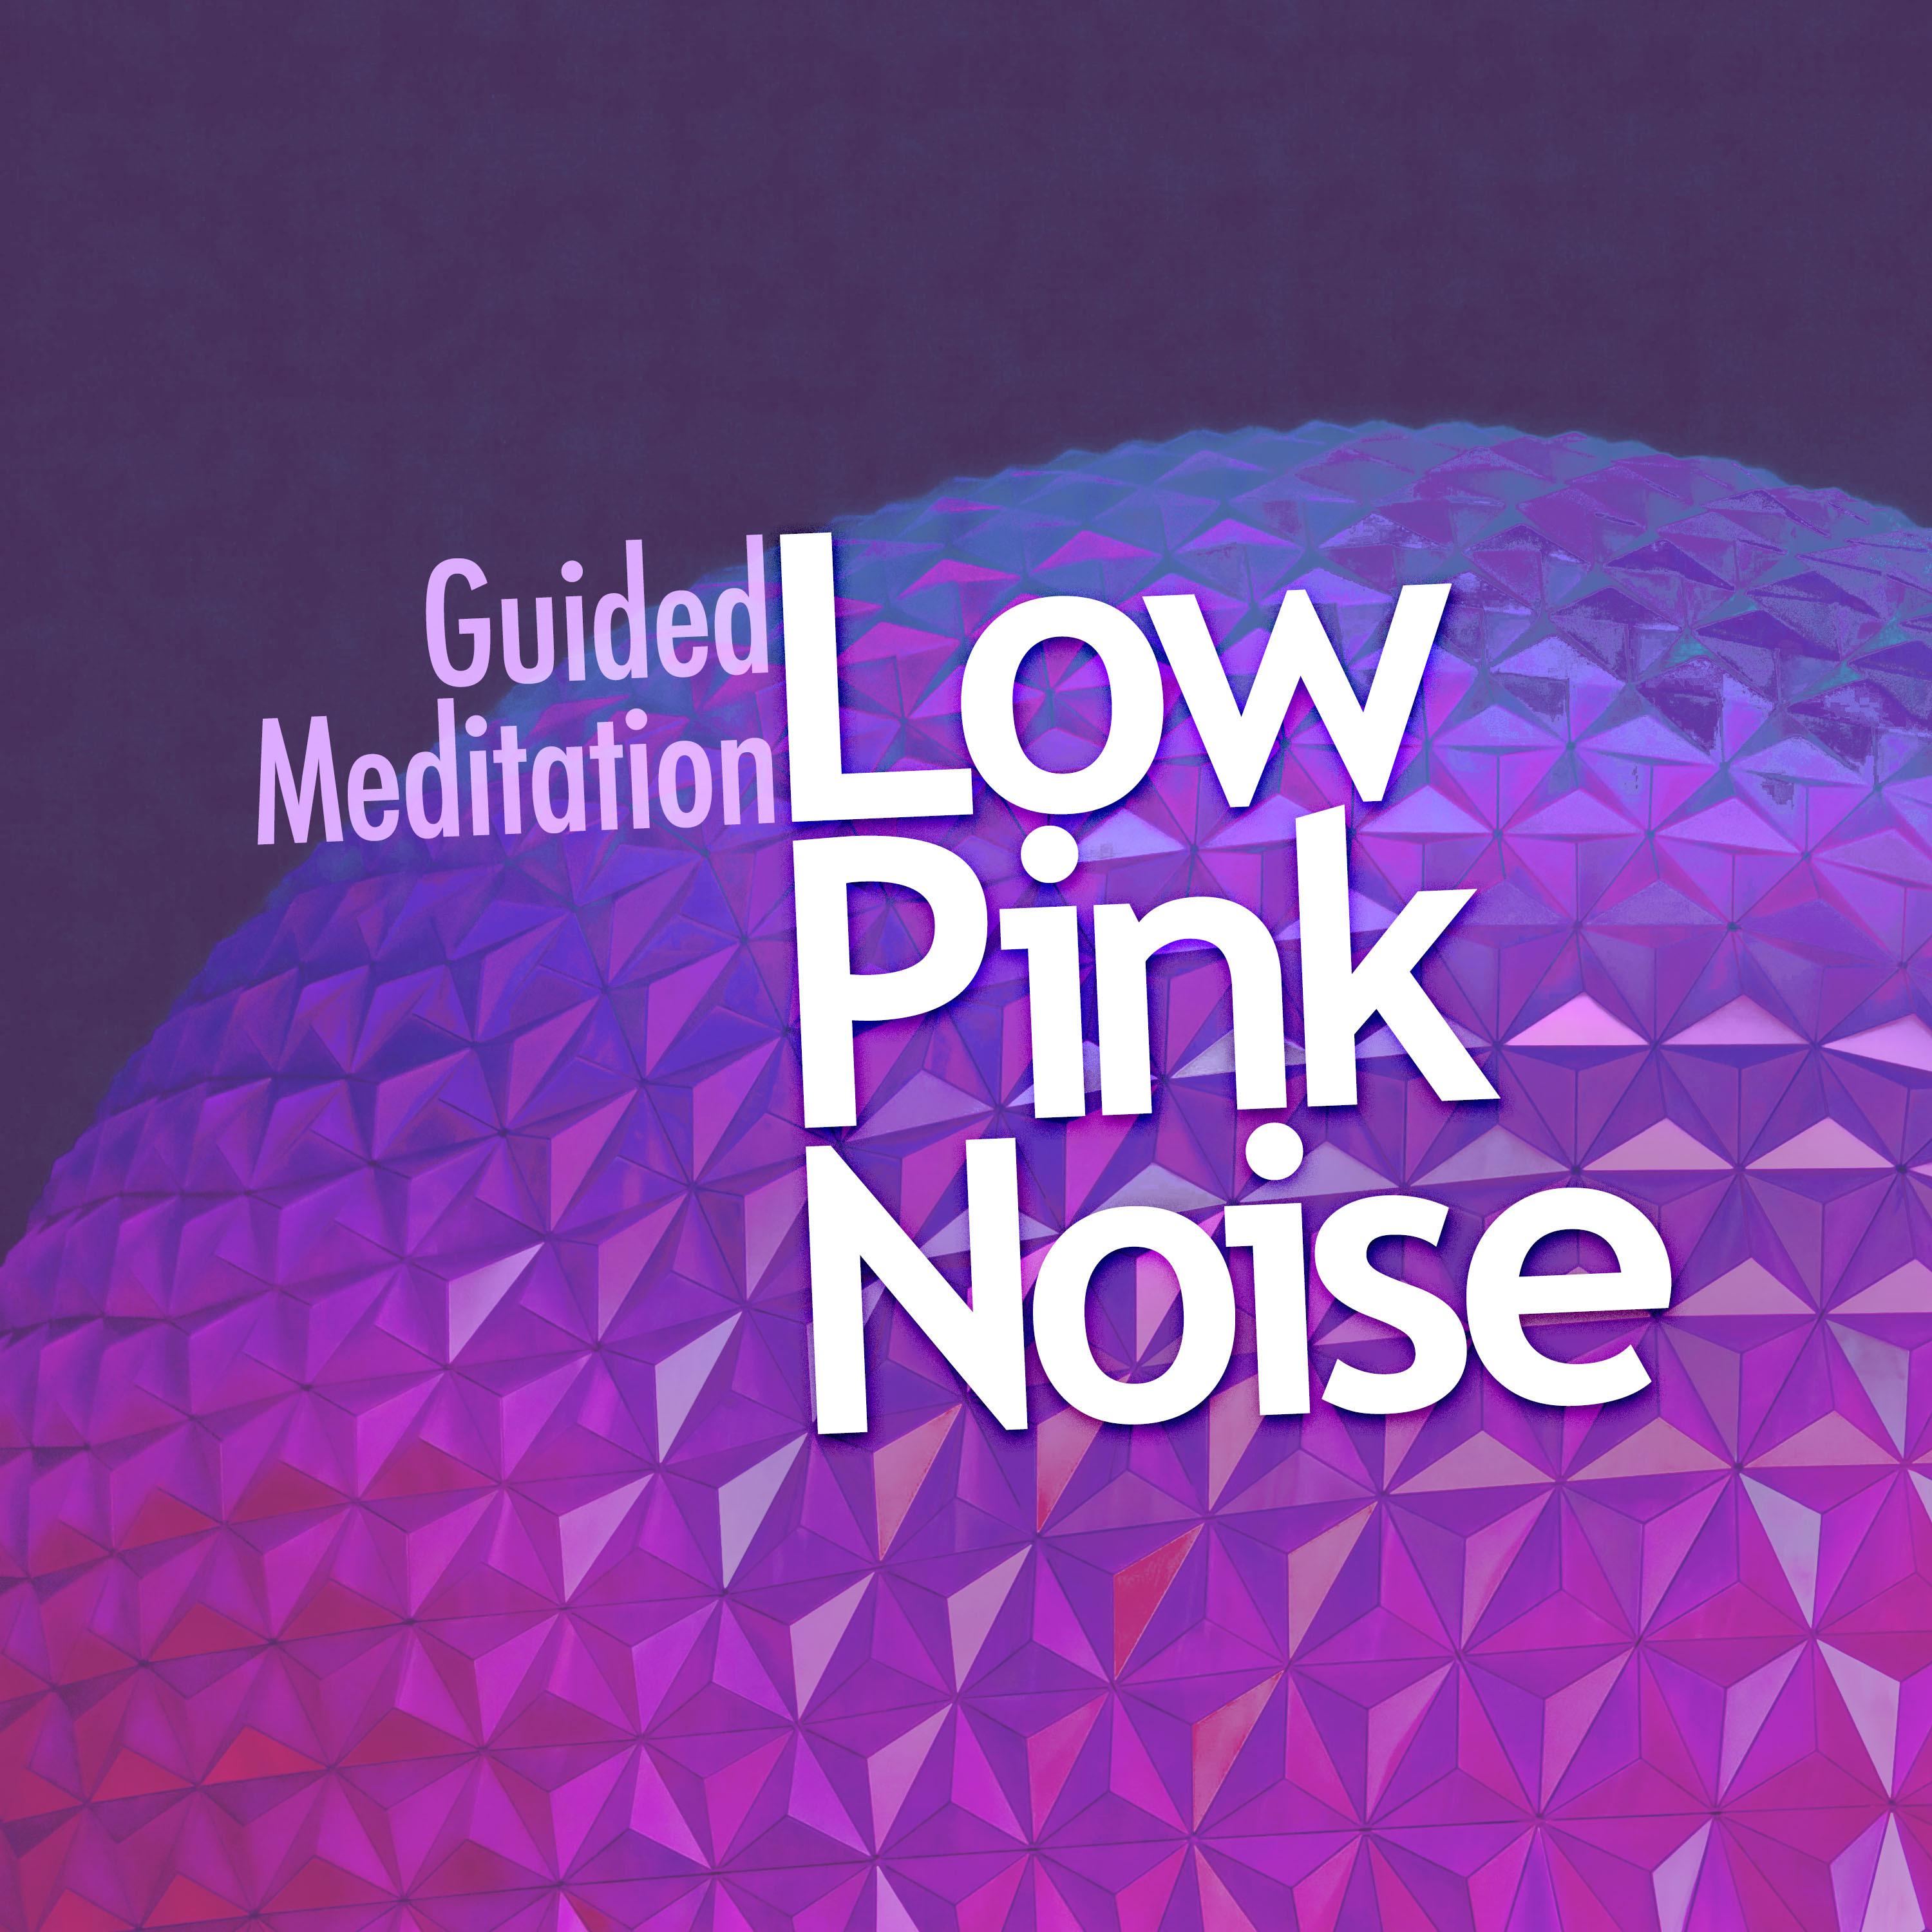 Low Pink Noise